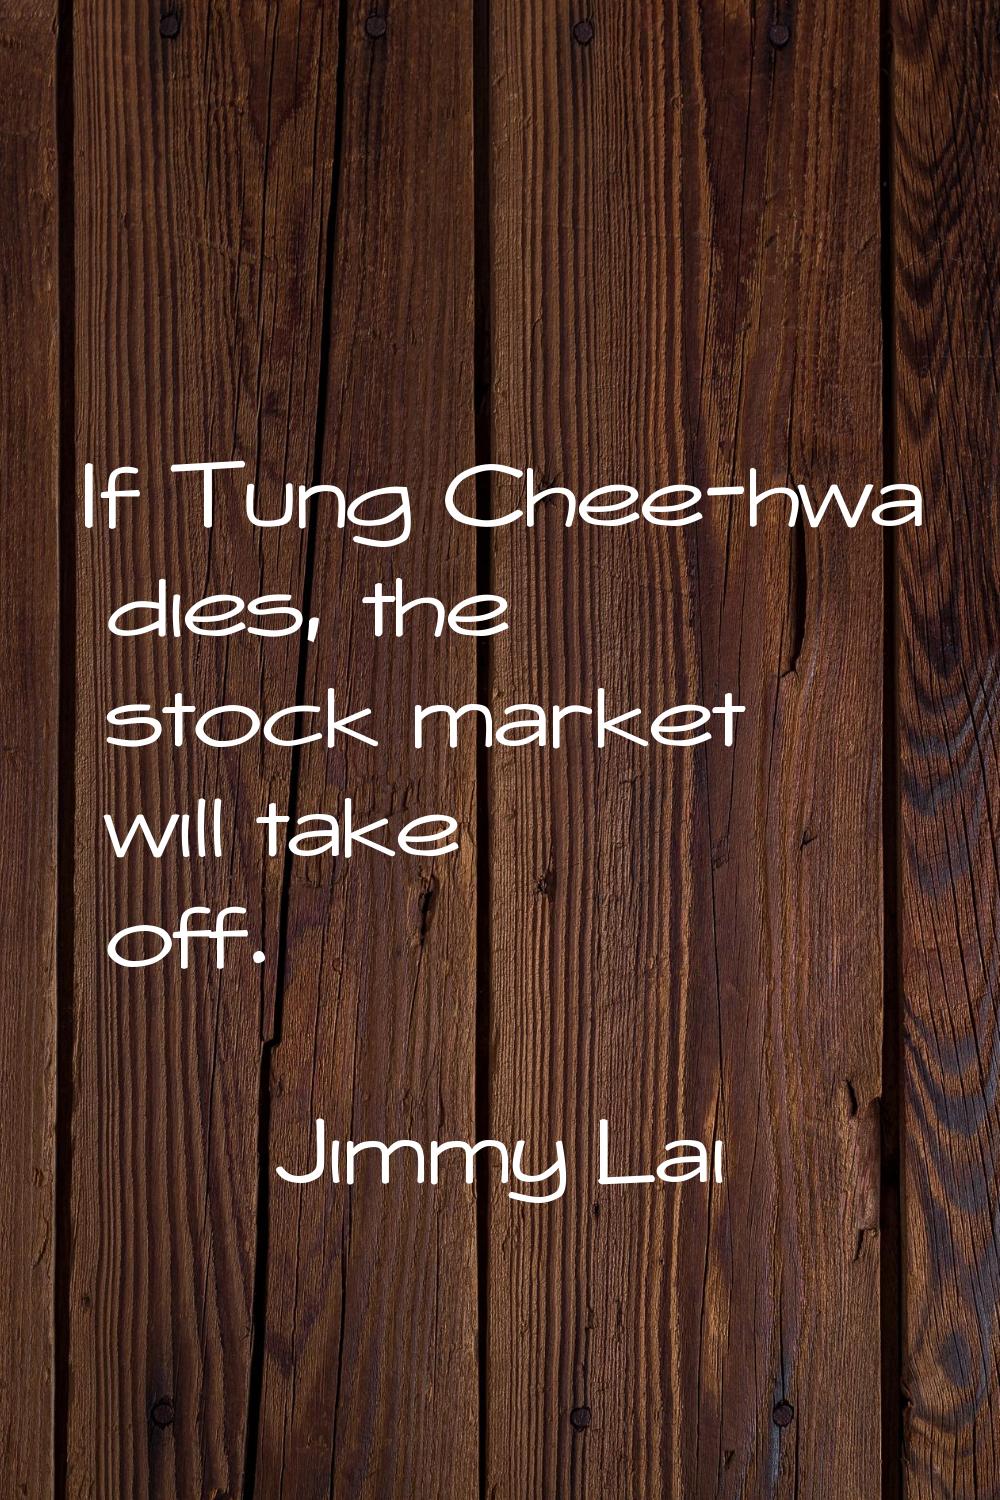 If Tung Chee-hwa dies, the stock market will take off.